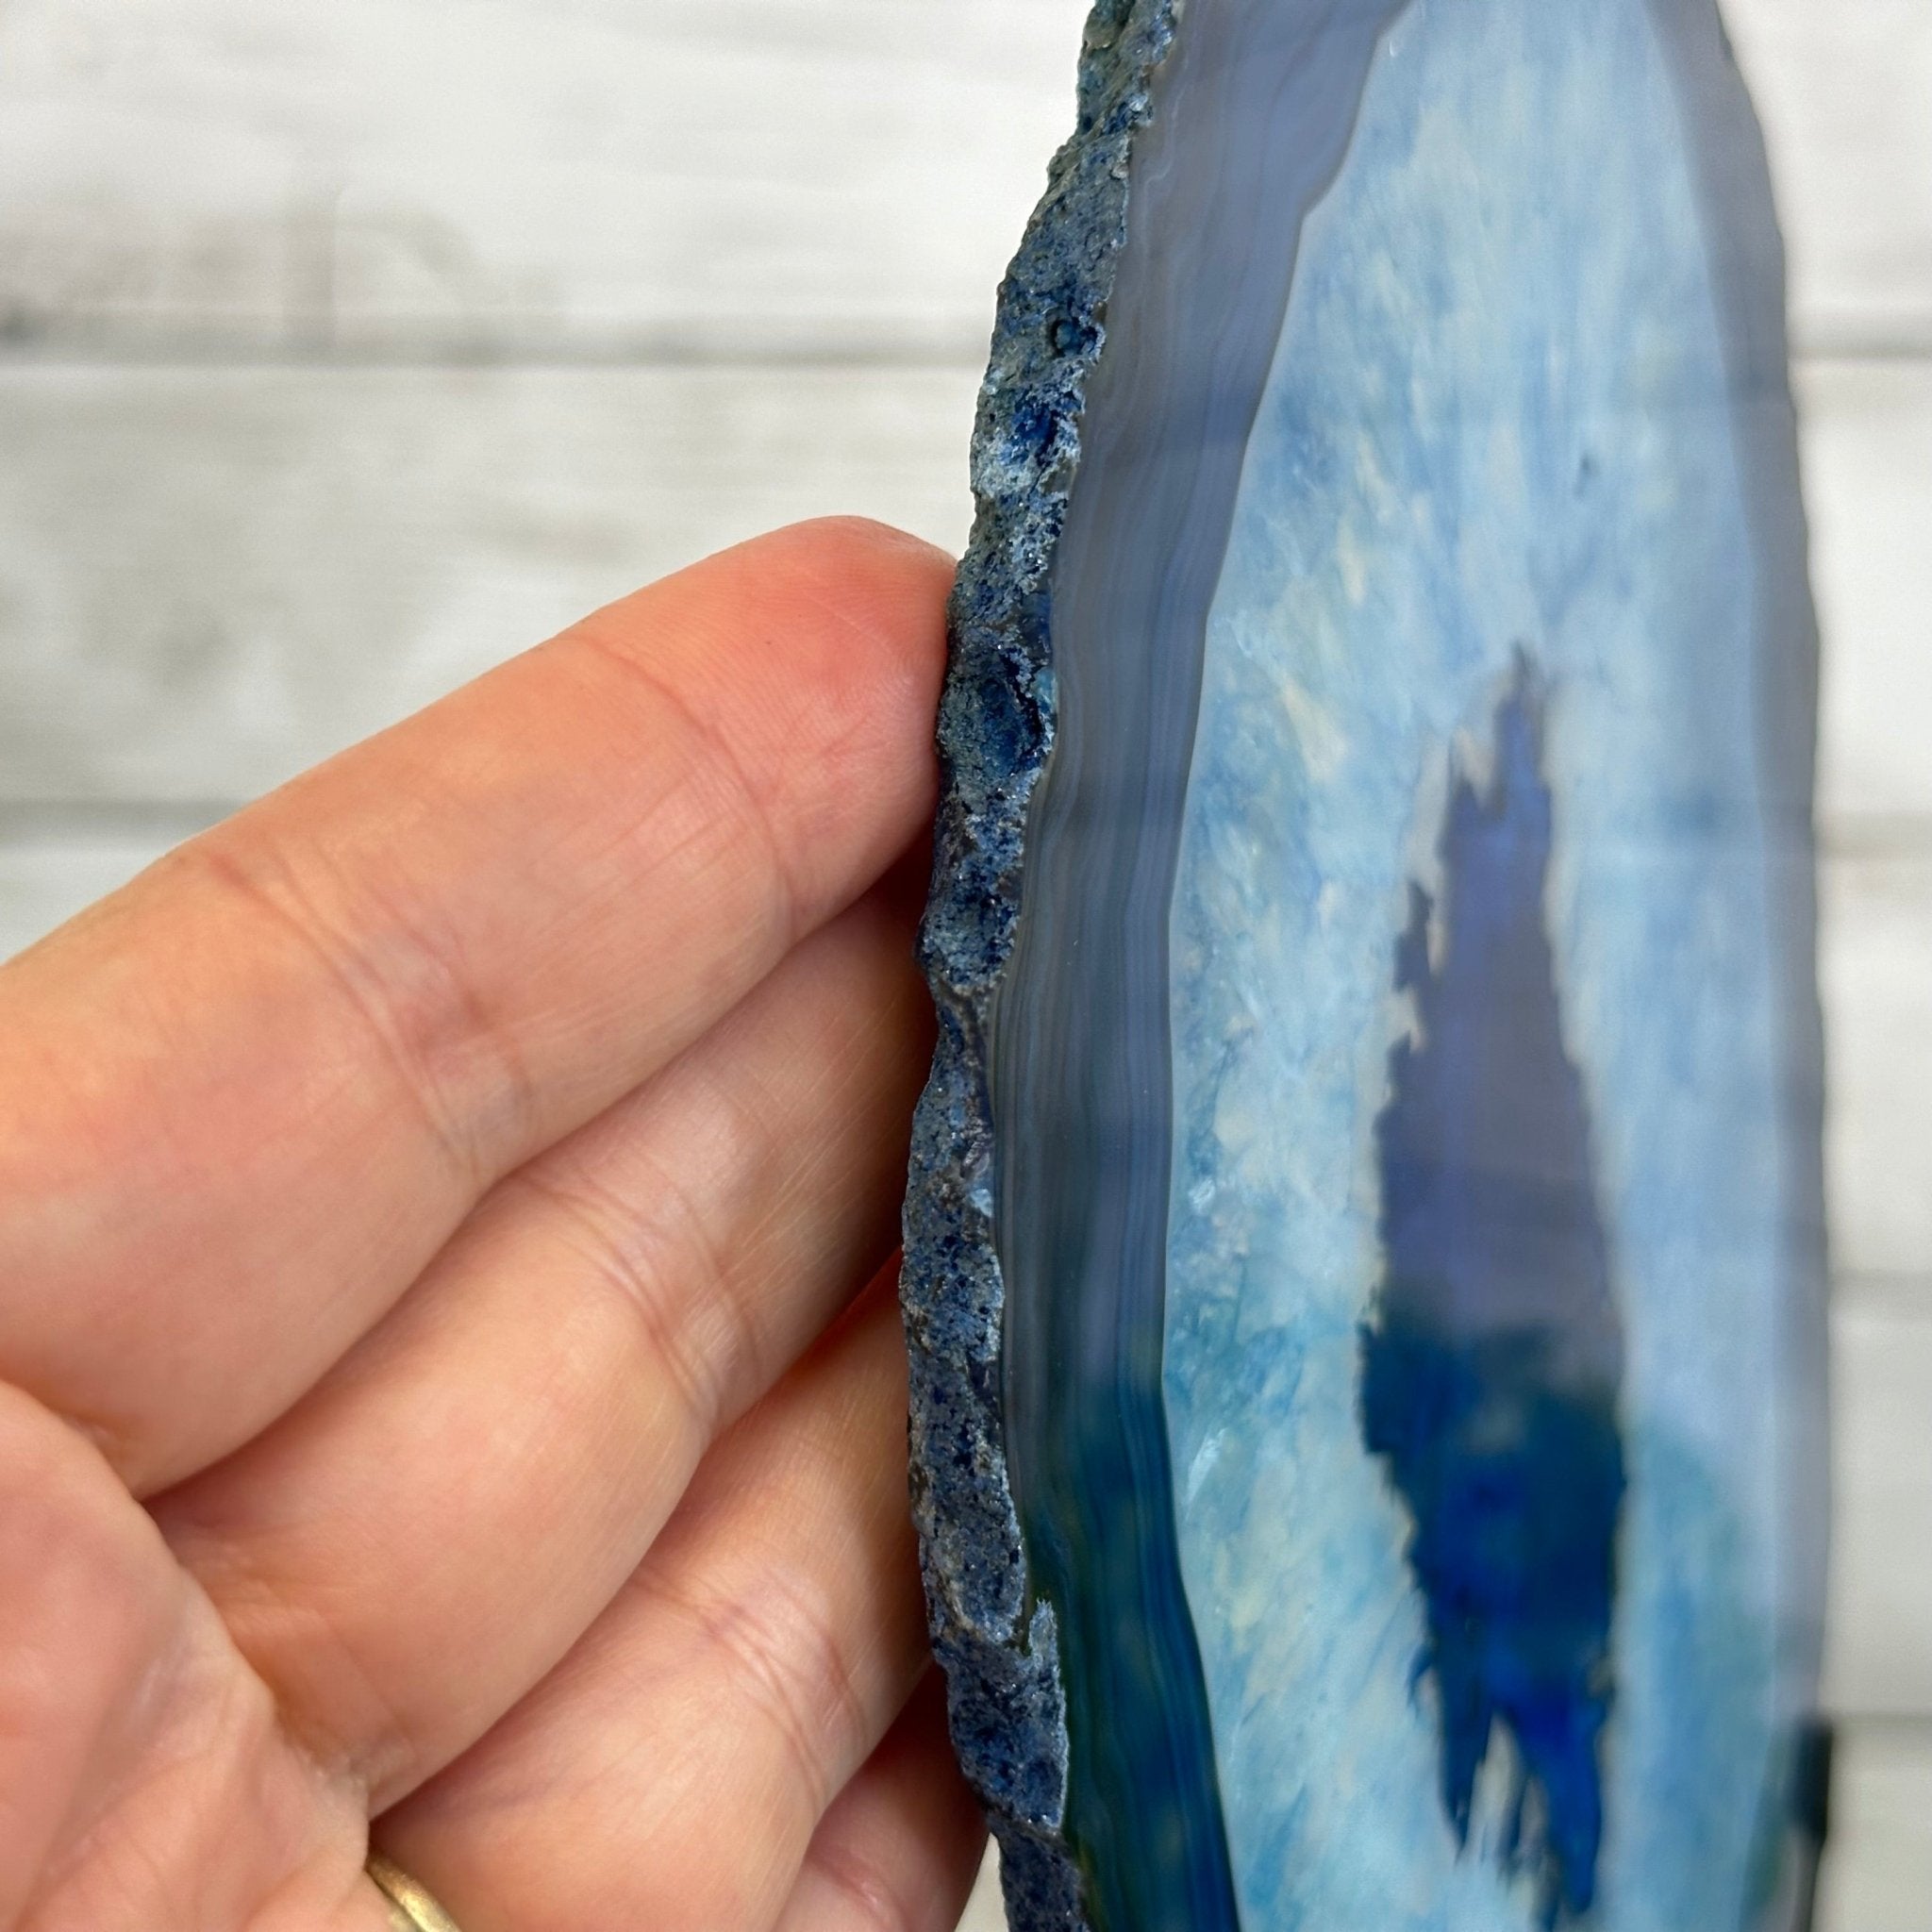 Brazilian Blue Agate Slice on a Metal Stand, 12.5" Tall #5055-0138 - Brazil GemsBrazil GemsBrazilian Blue Agate Slice on a Metal Stand, 12.5" Tall #5055-0138Slices on Fixed Bases5055-0138